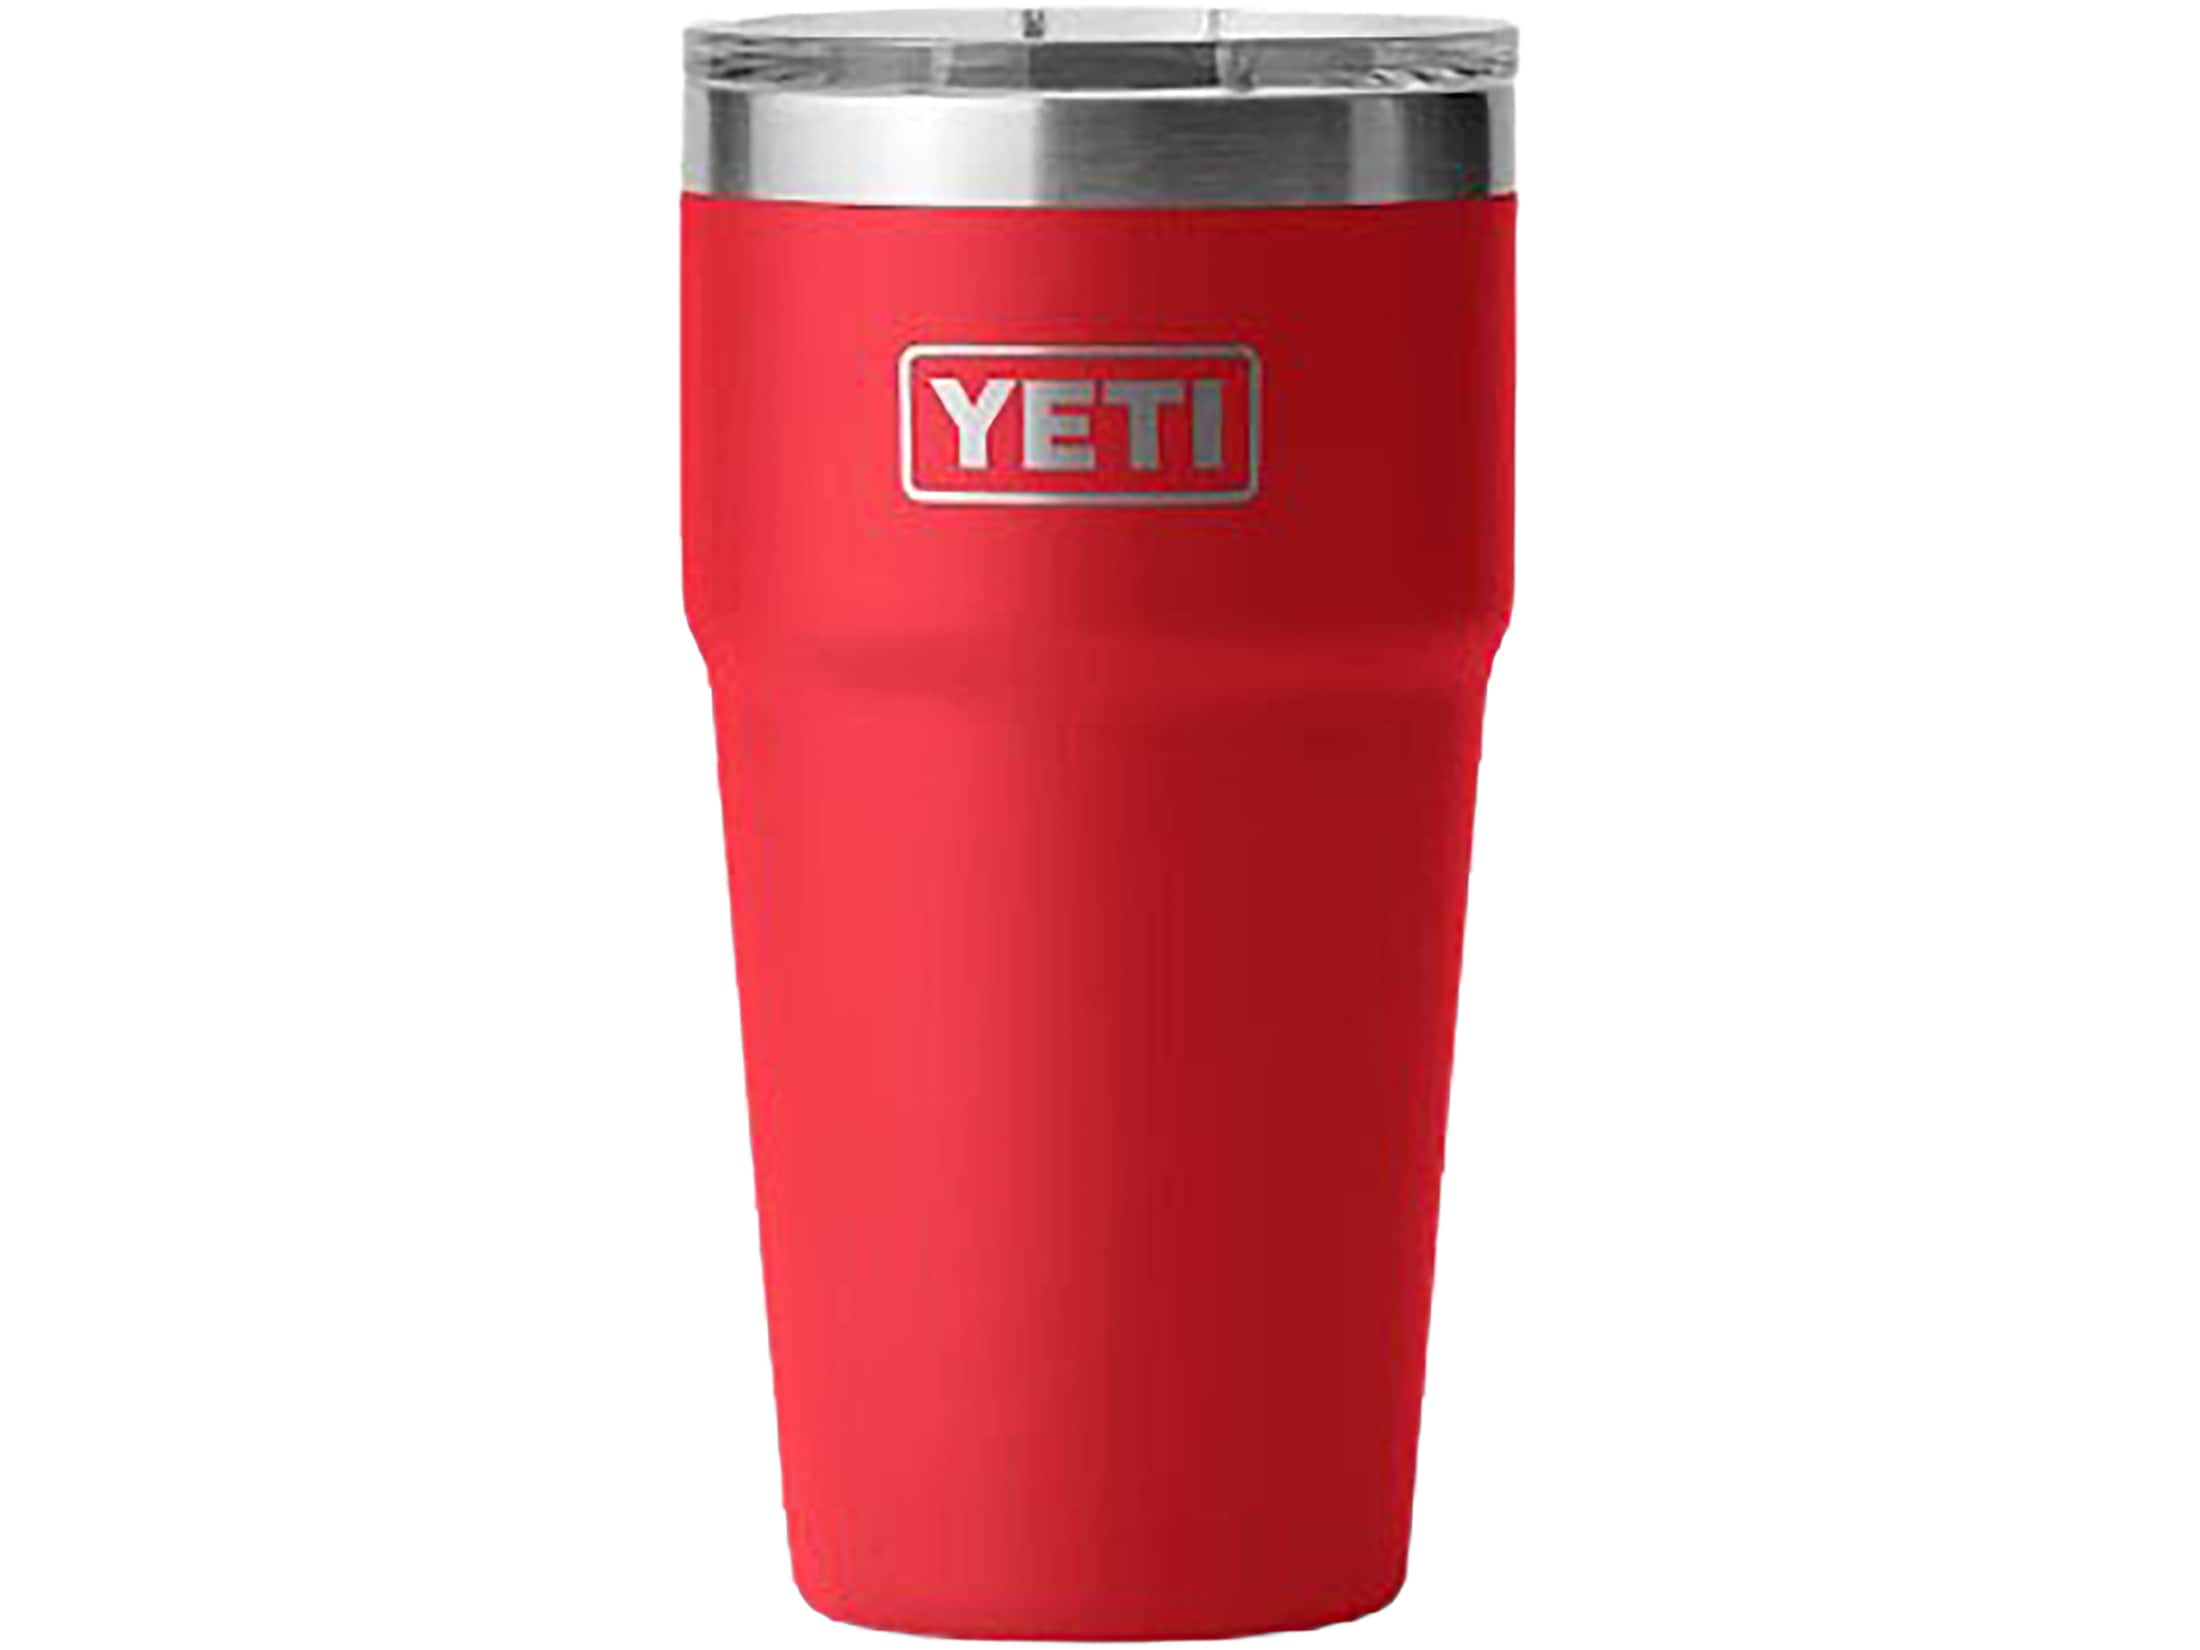 YETI Magslider Spring Color Replacement Pack